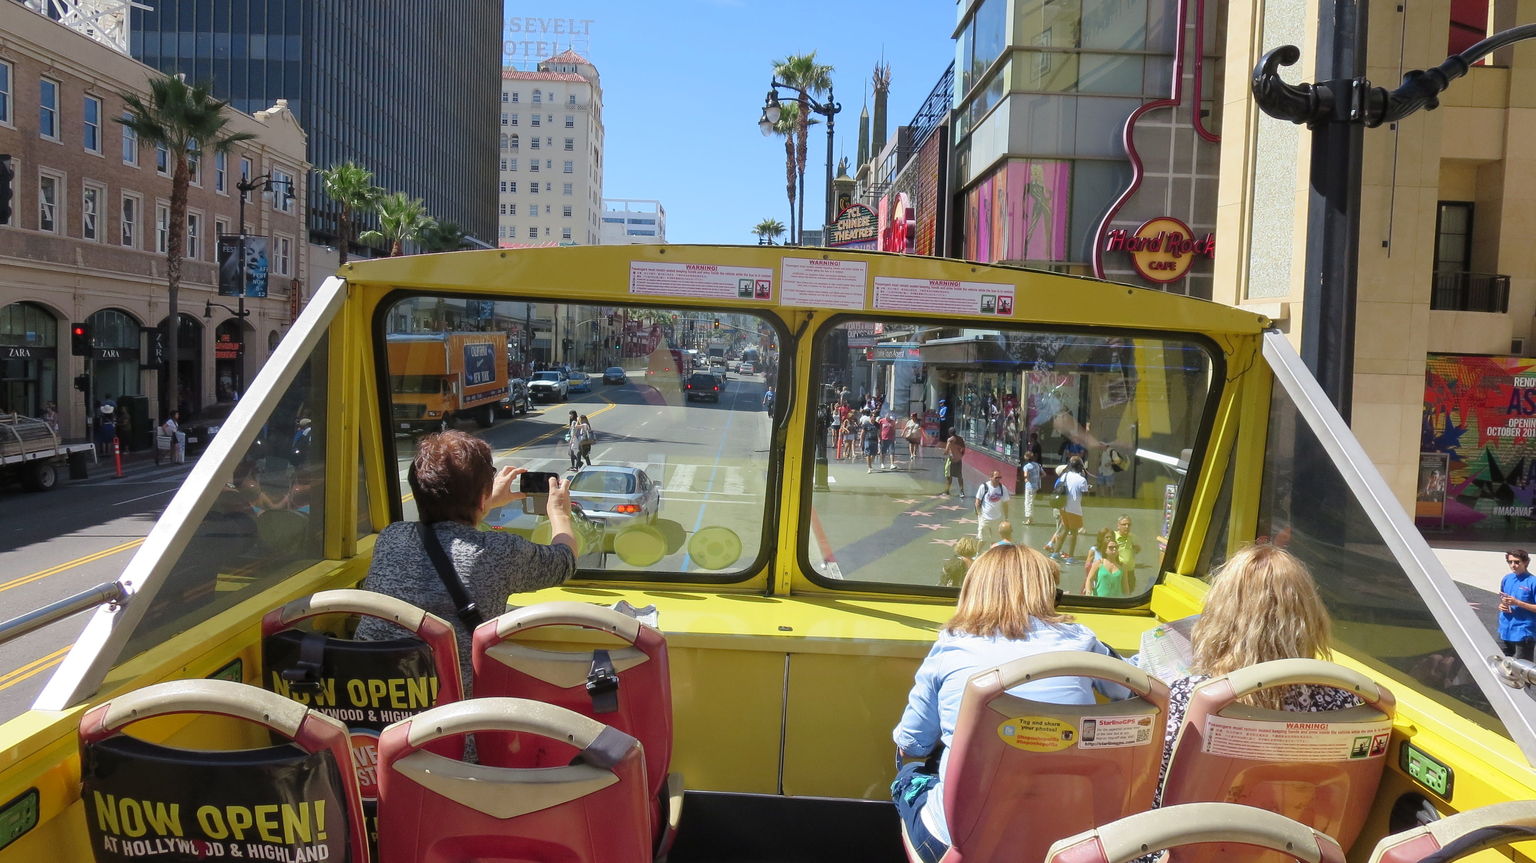 Excellent way to see all the sights in LA and surroundings